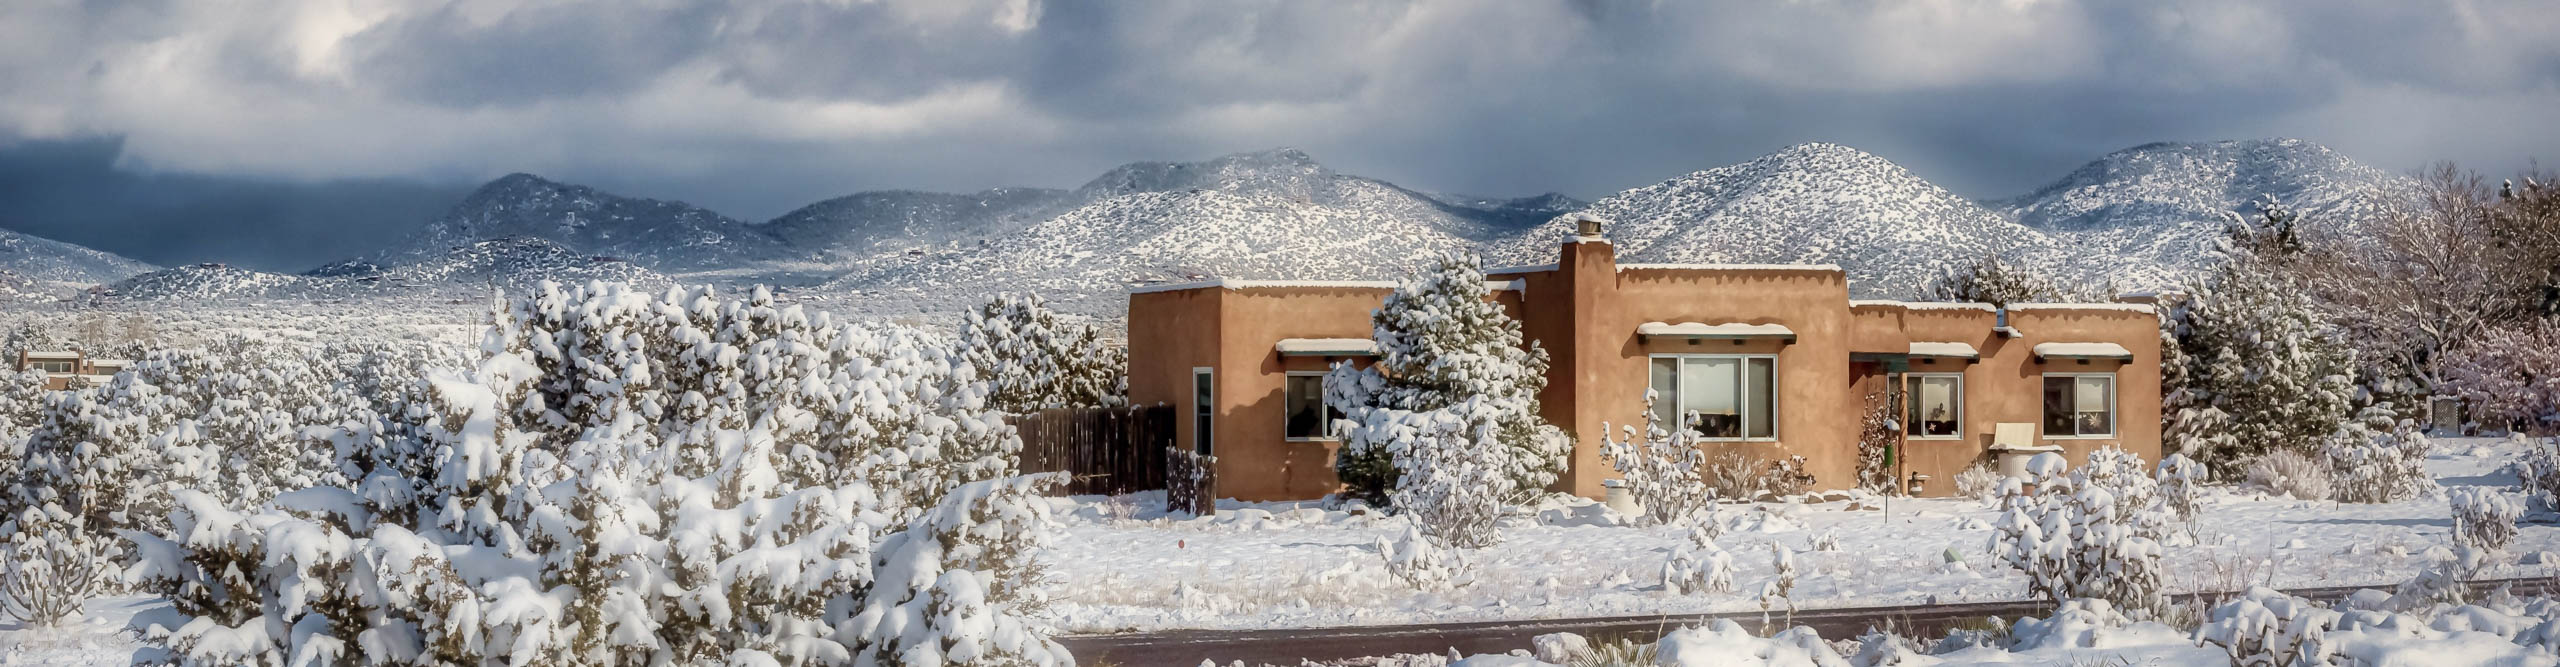 Snow on the hills and building of Sante Fe, New Mexico, USA